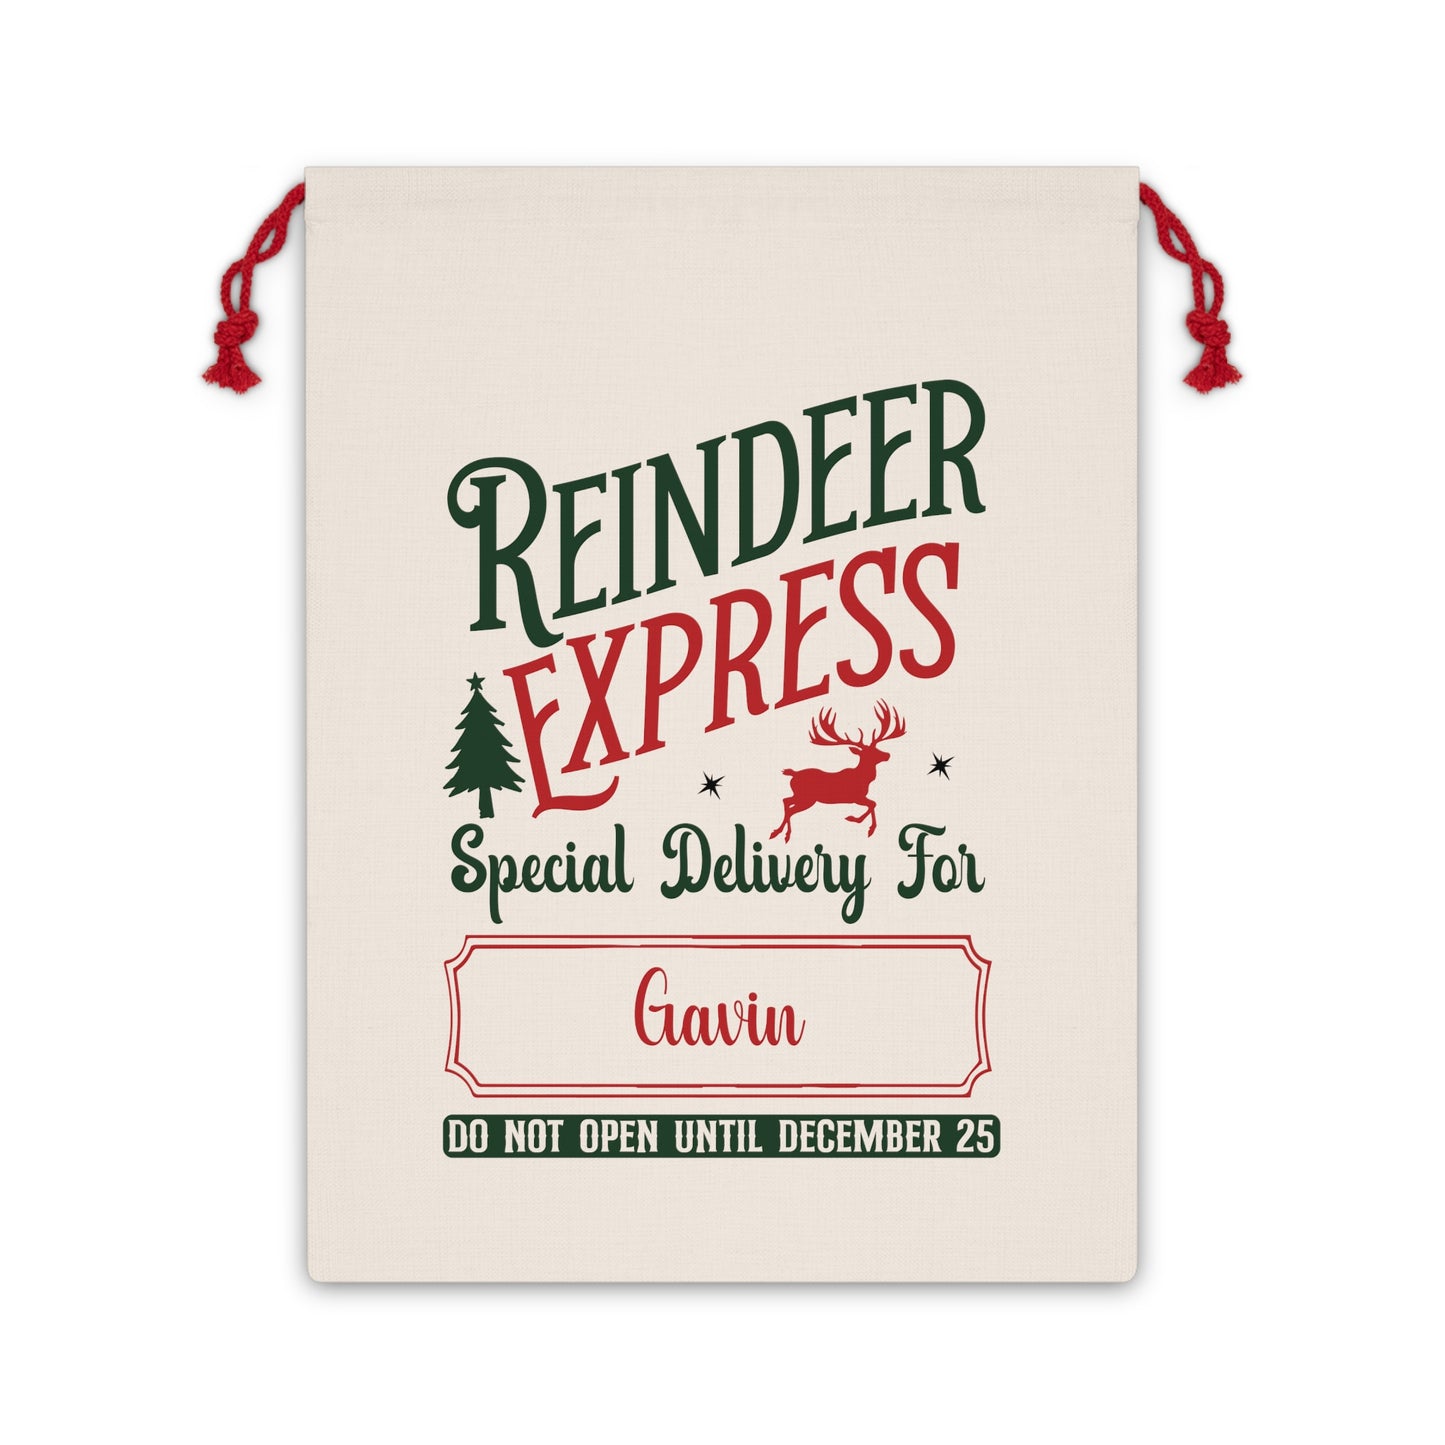 Personalized from Santa Gift Bag - Reindeer Express Special Delivery